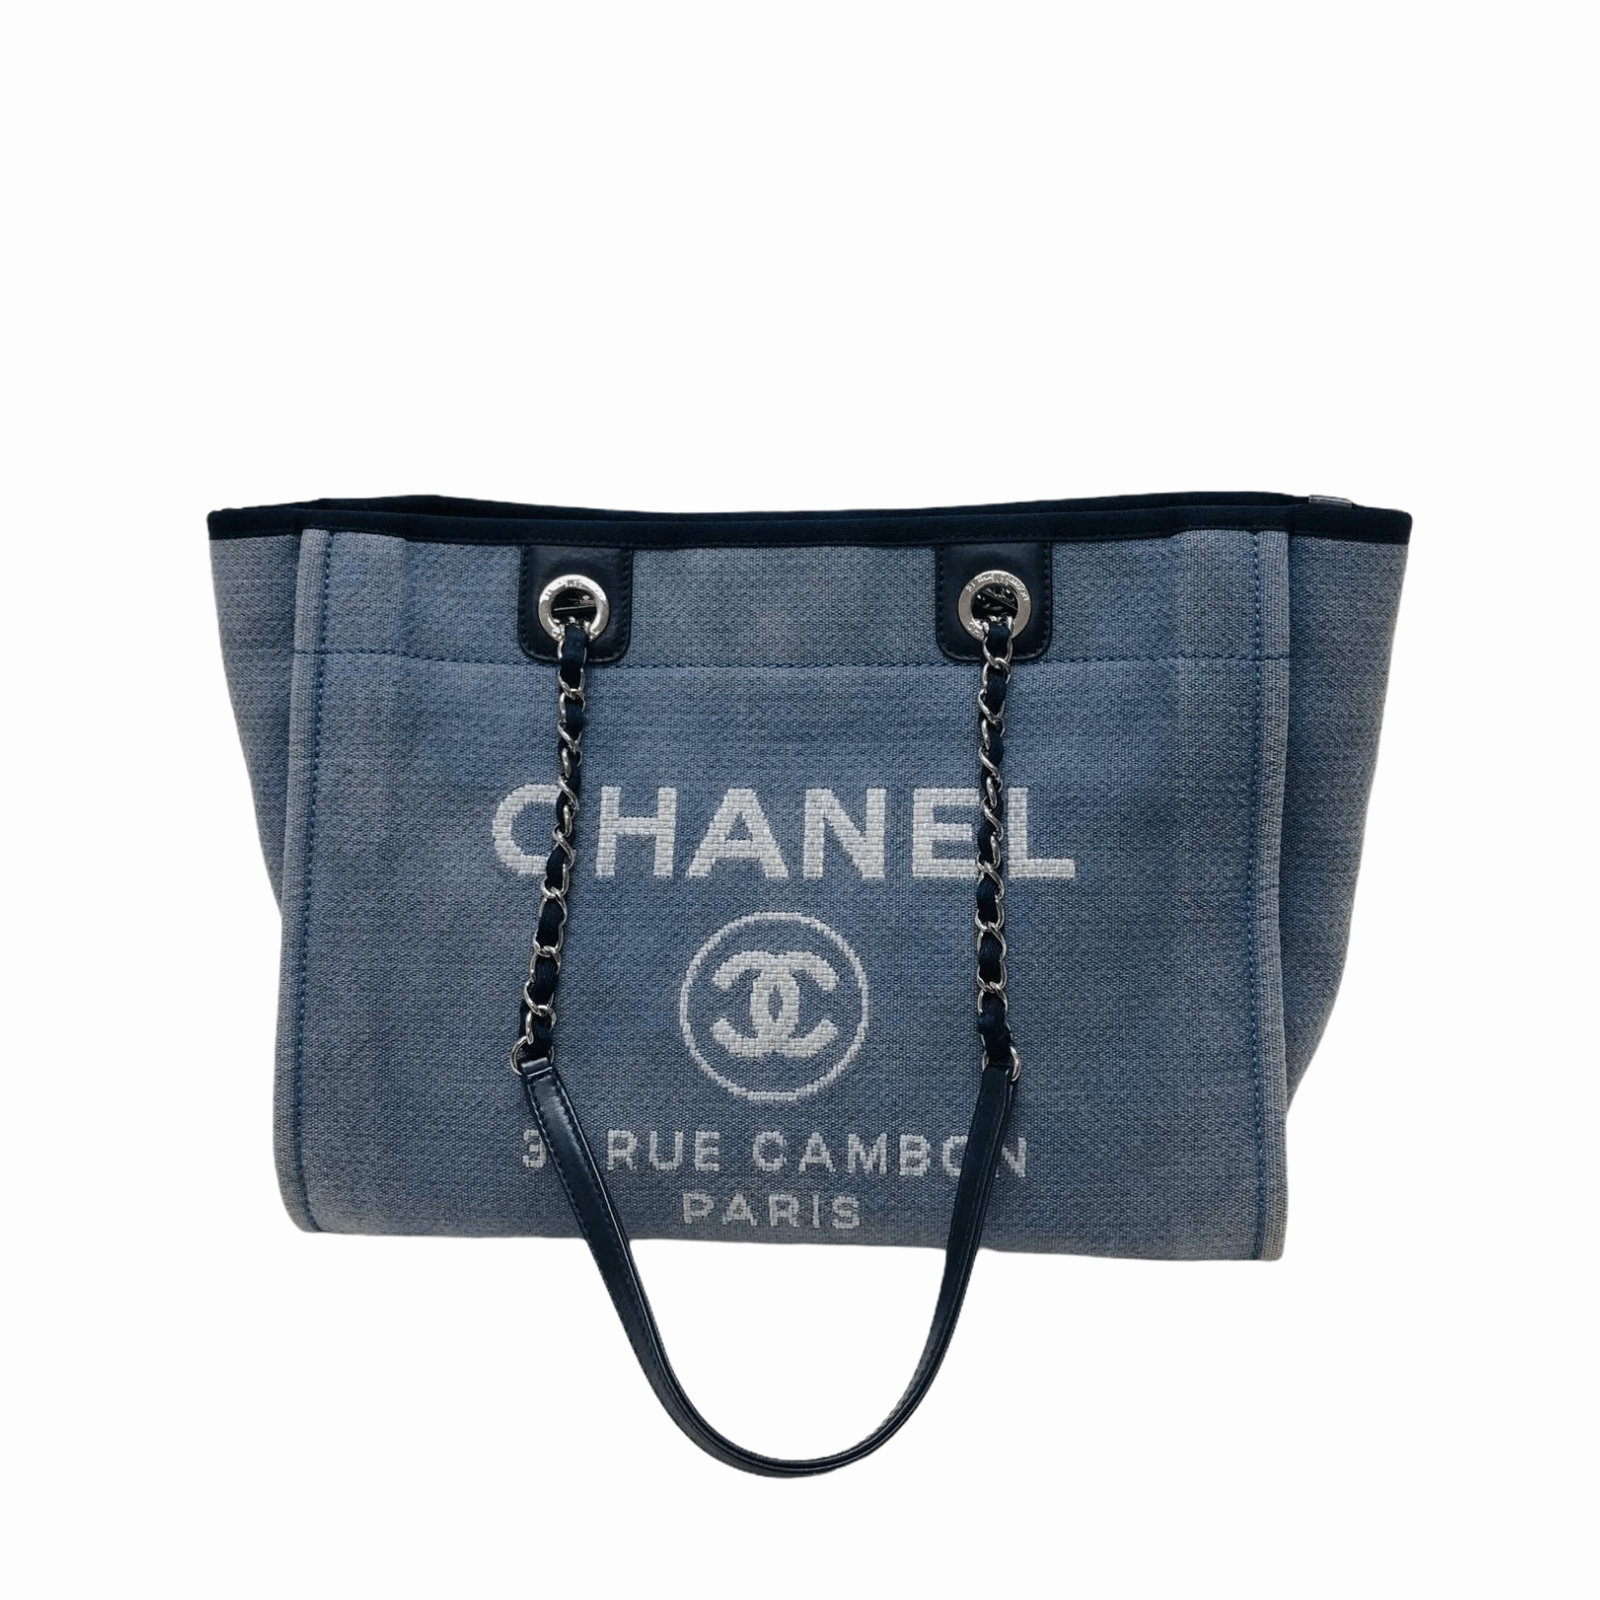 Authentic Chanel Deauville Dark Blue Denim Large Shopping Tote Bag